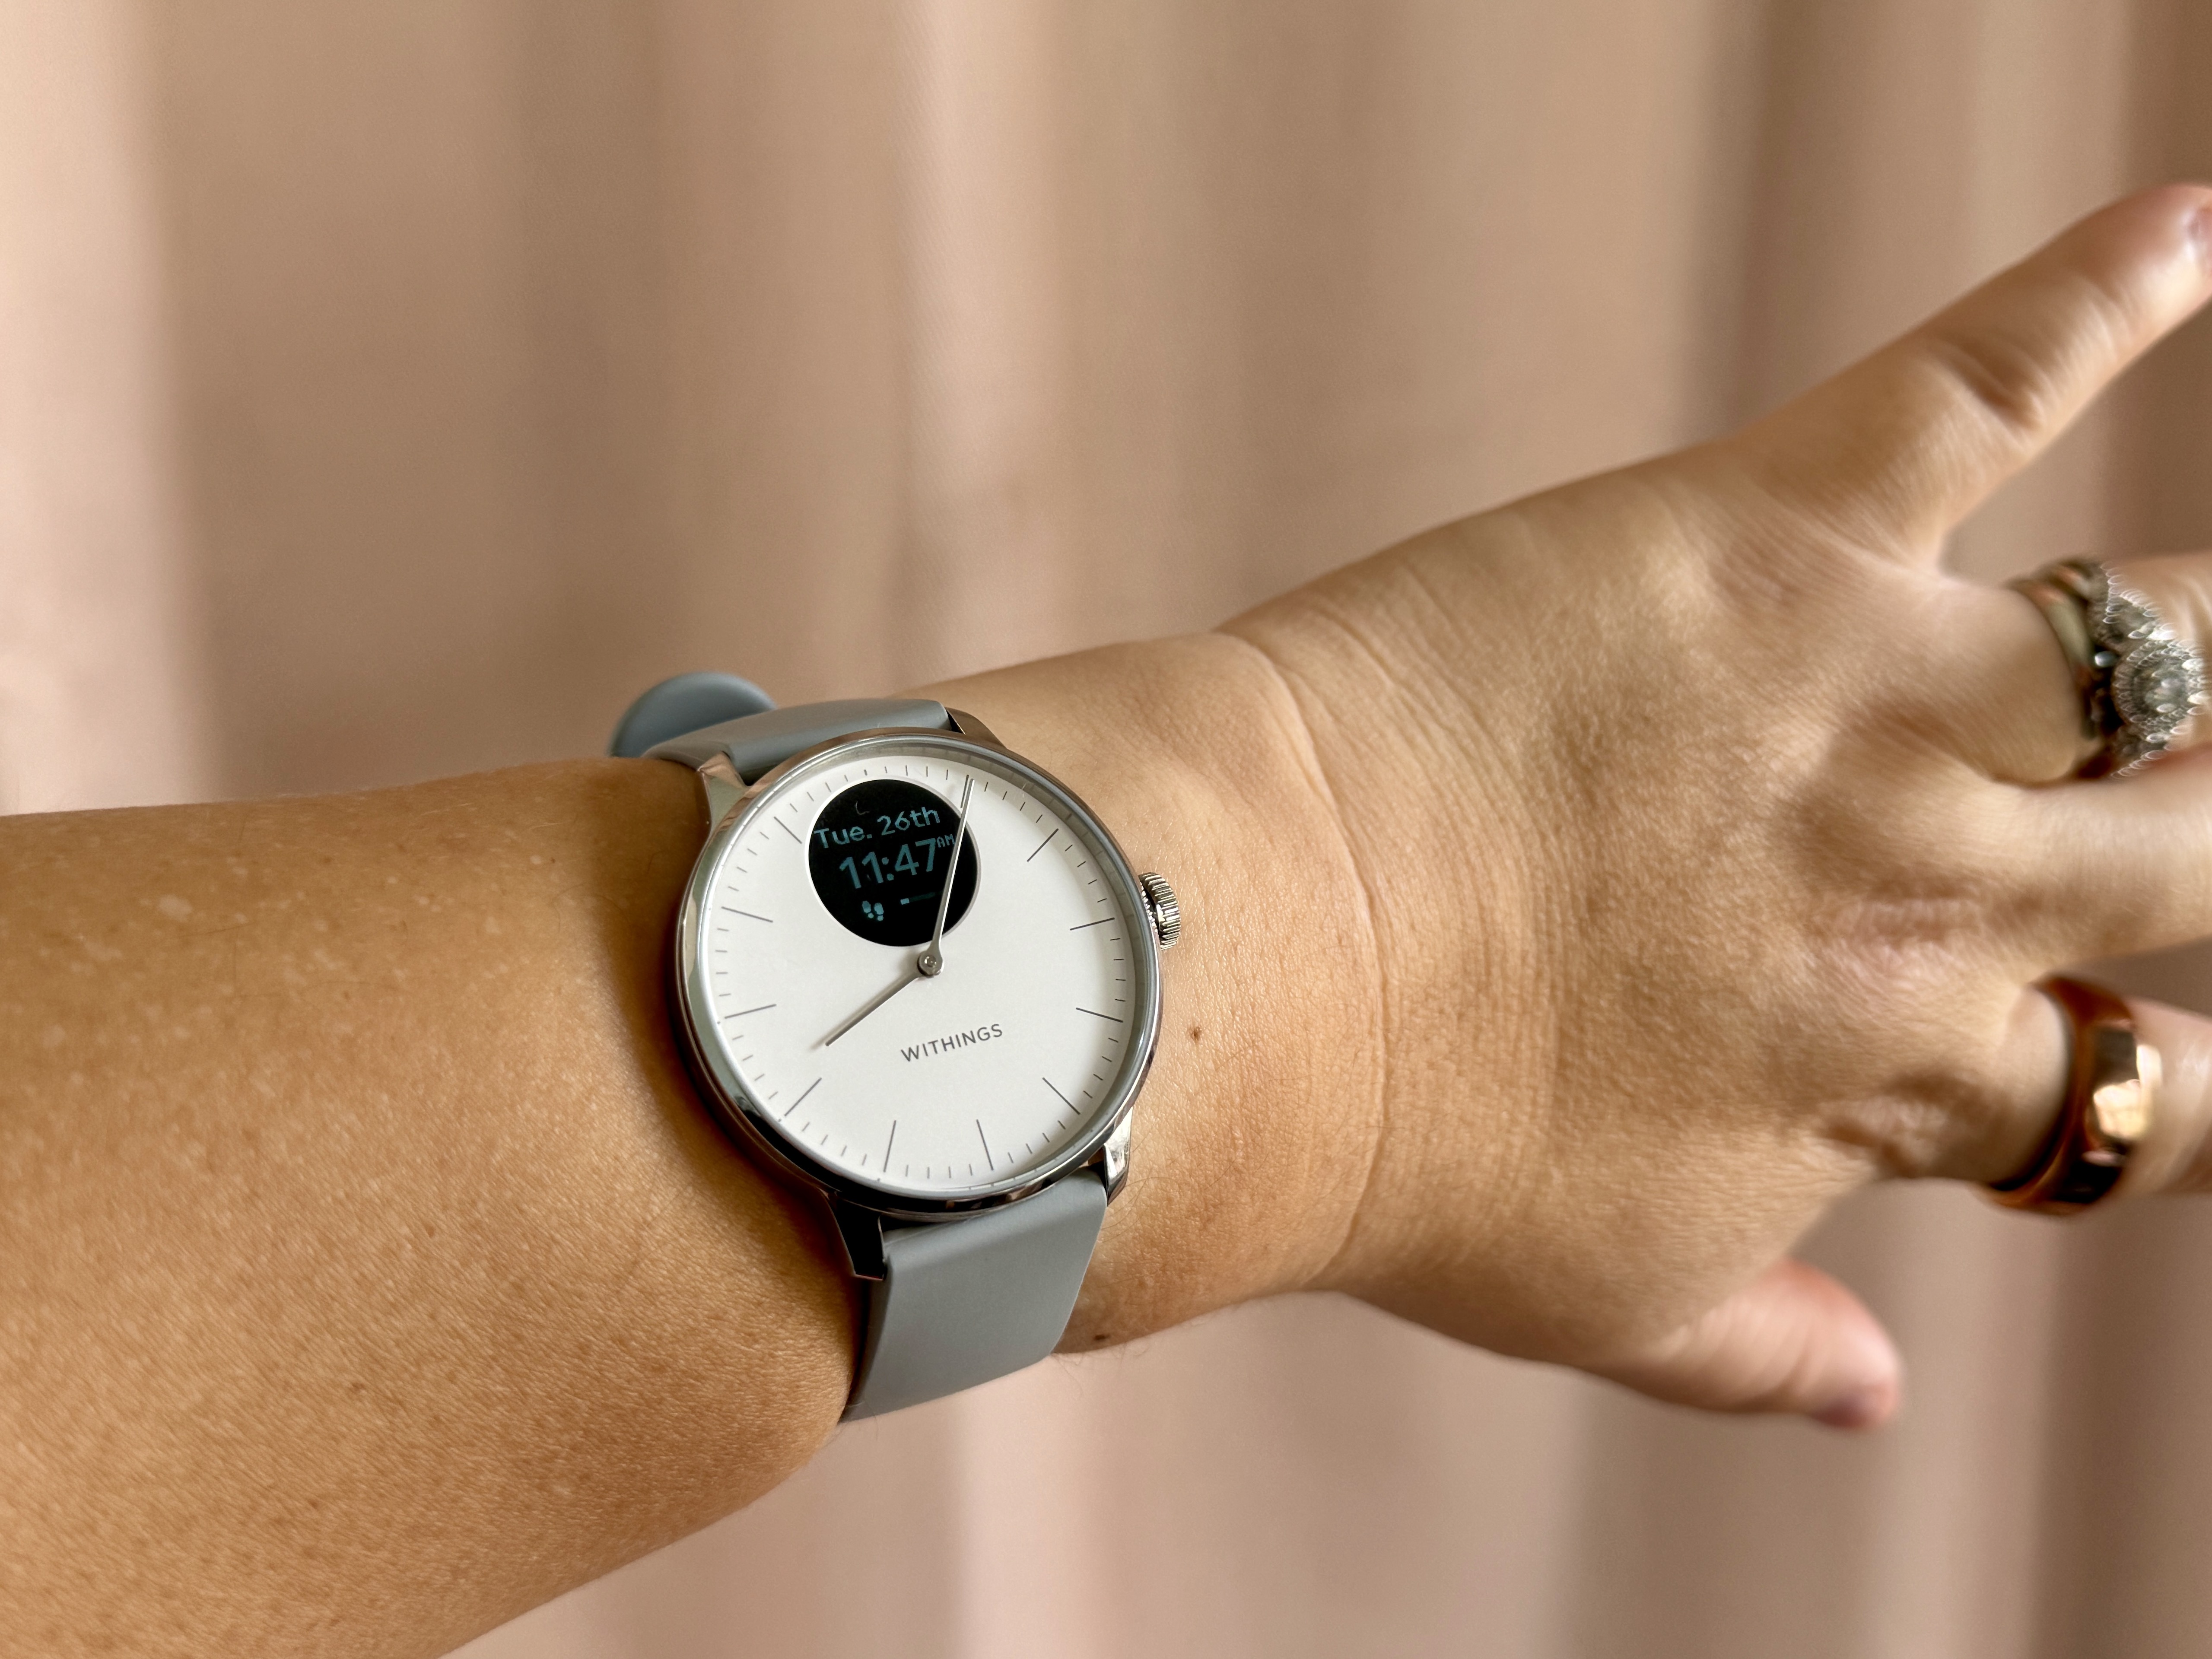 Withings ScanWatch Light being worn on wrist.